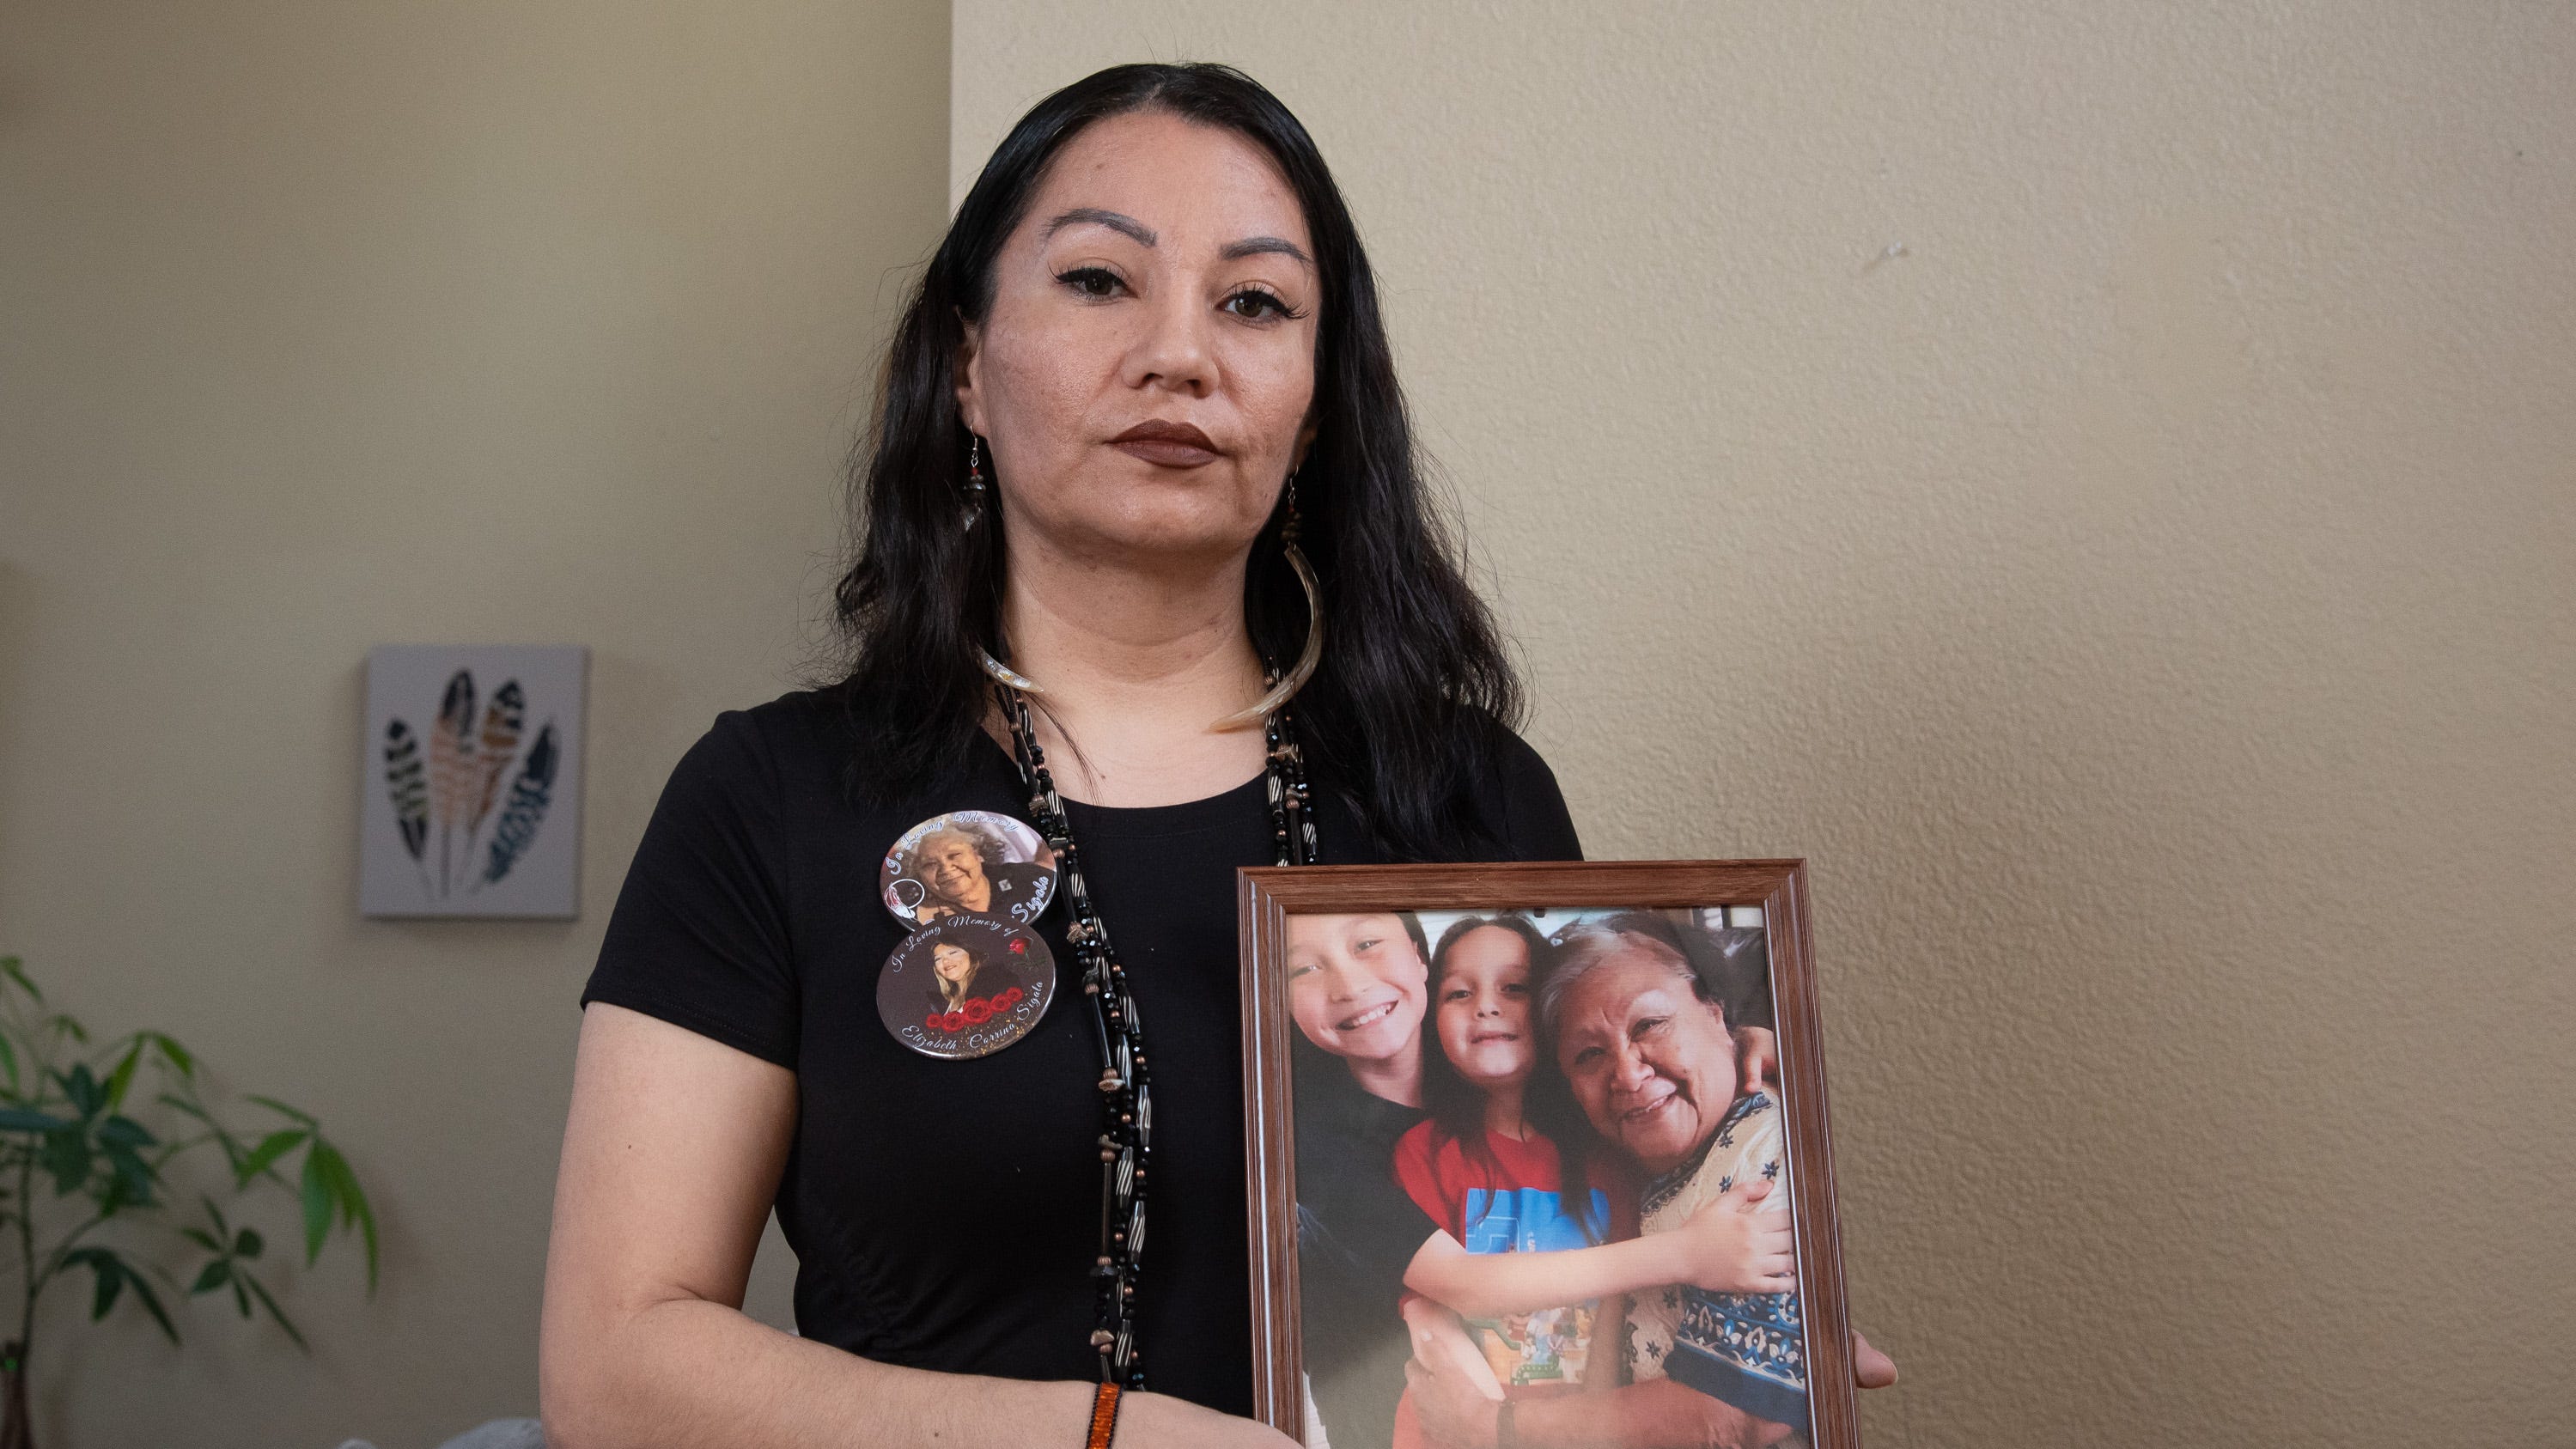 'We're born Indian and we die white:' Indigenous leaders in California fear COVID deaths are going undercounted